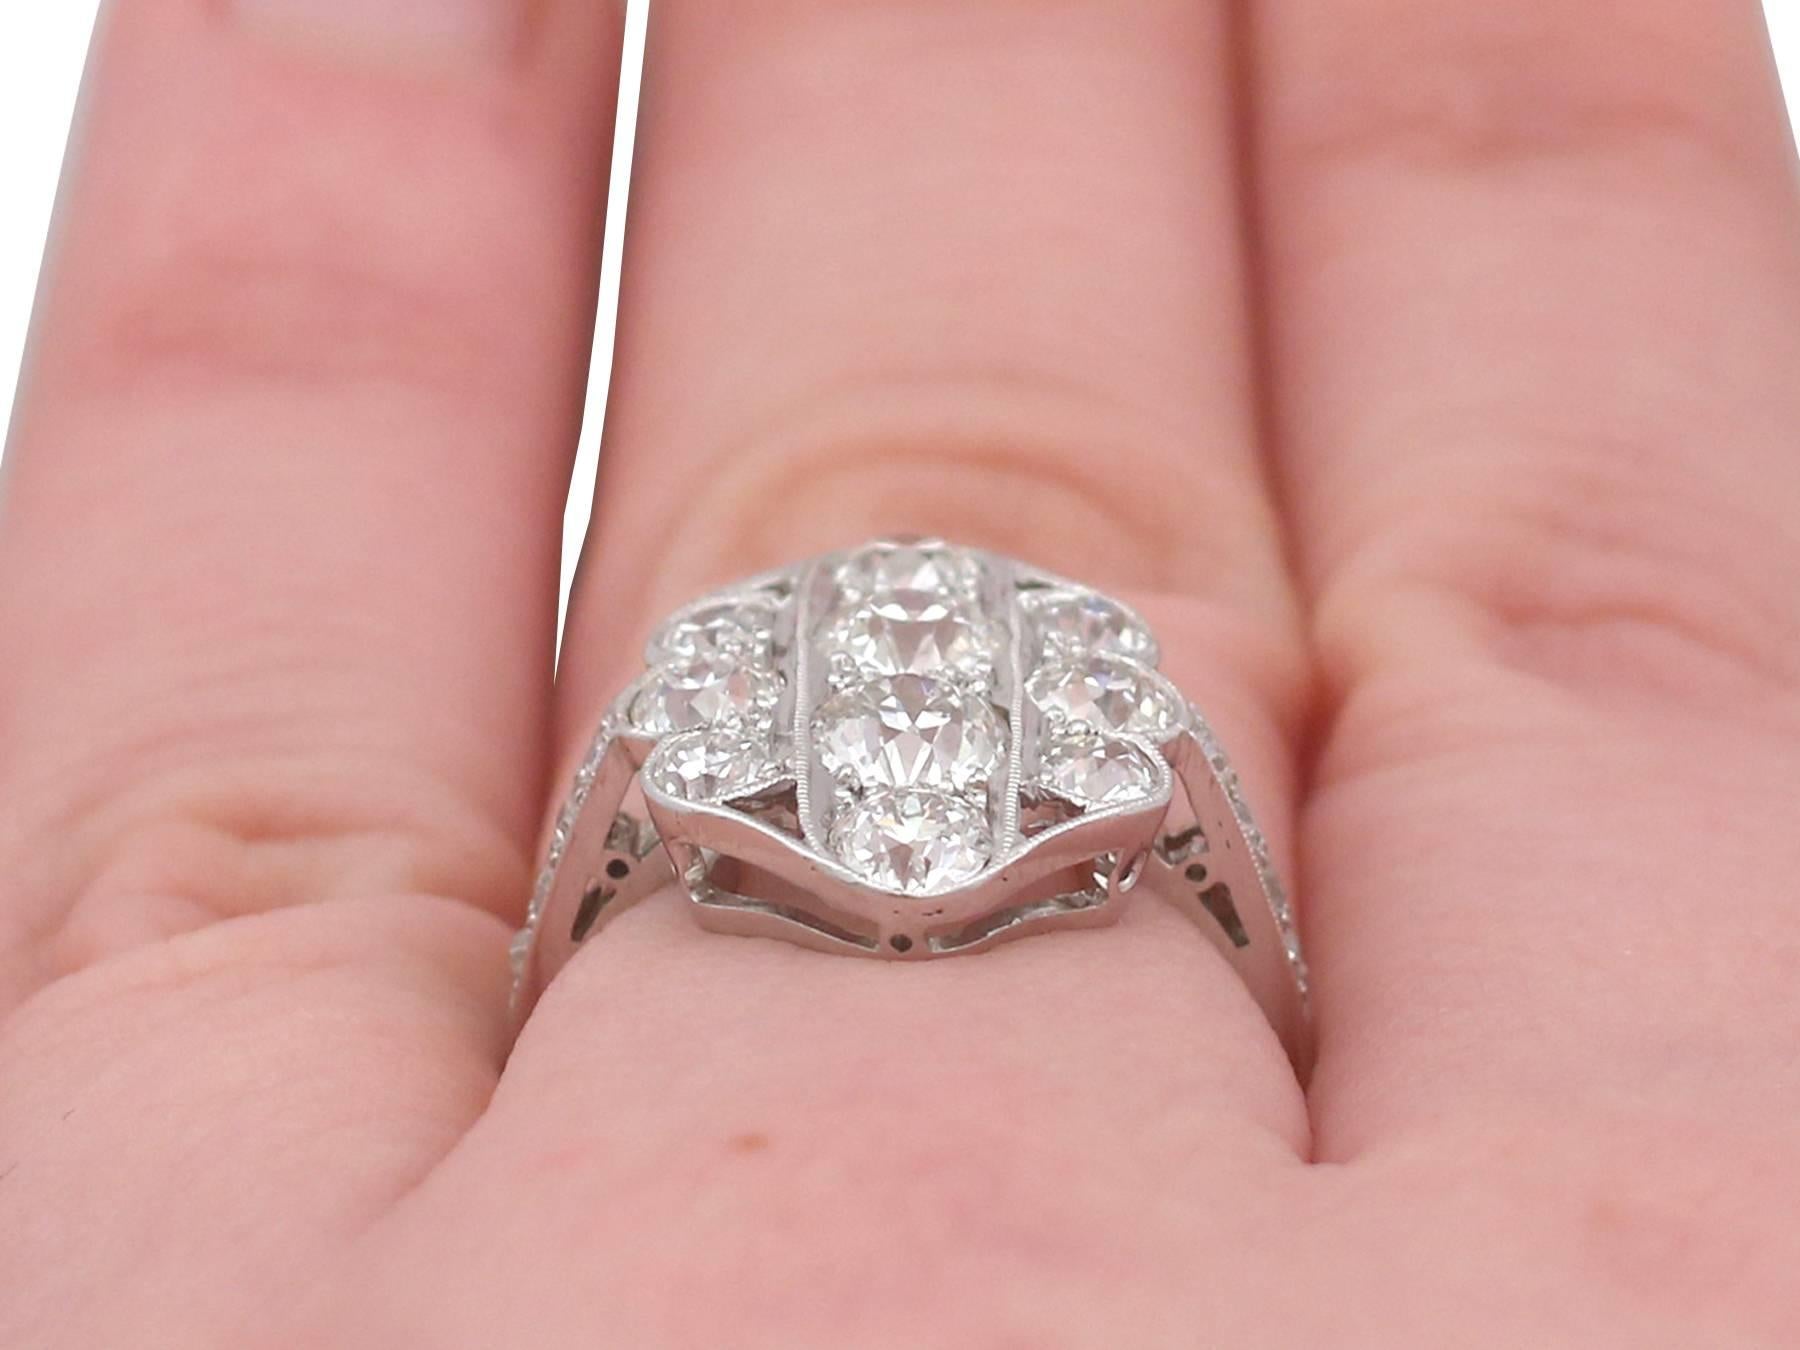 Vintage 1940s 2.85 Carat Diamond and White Gold Cocktail Ring For Sale 2